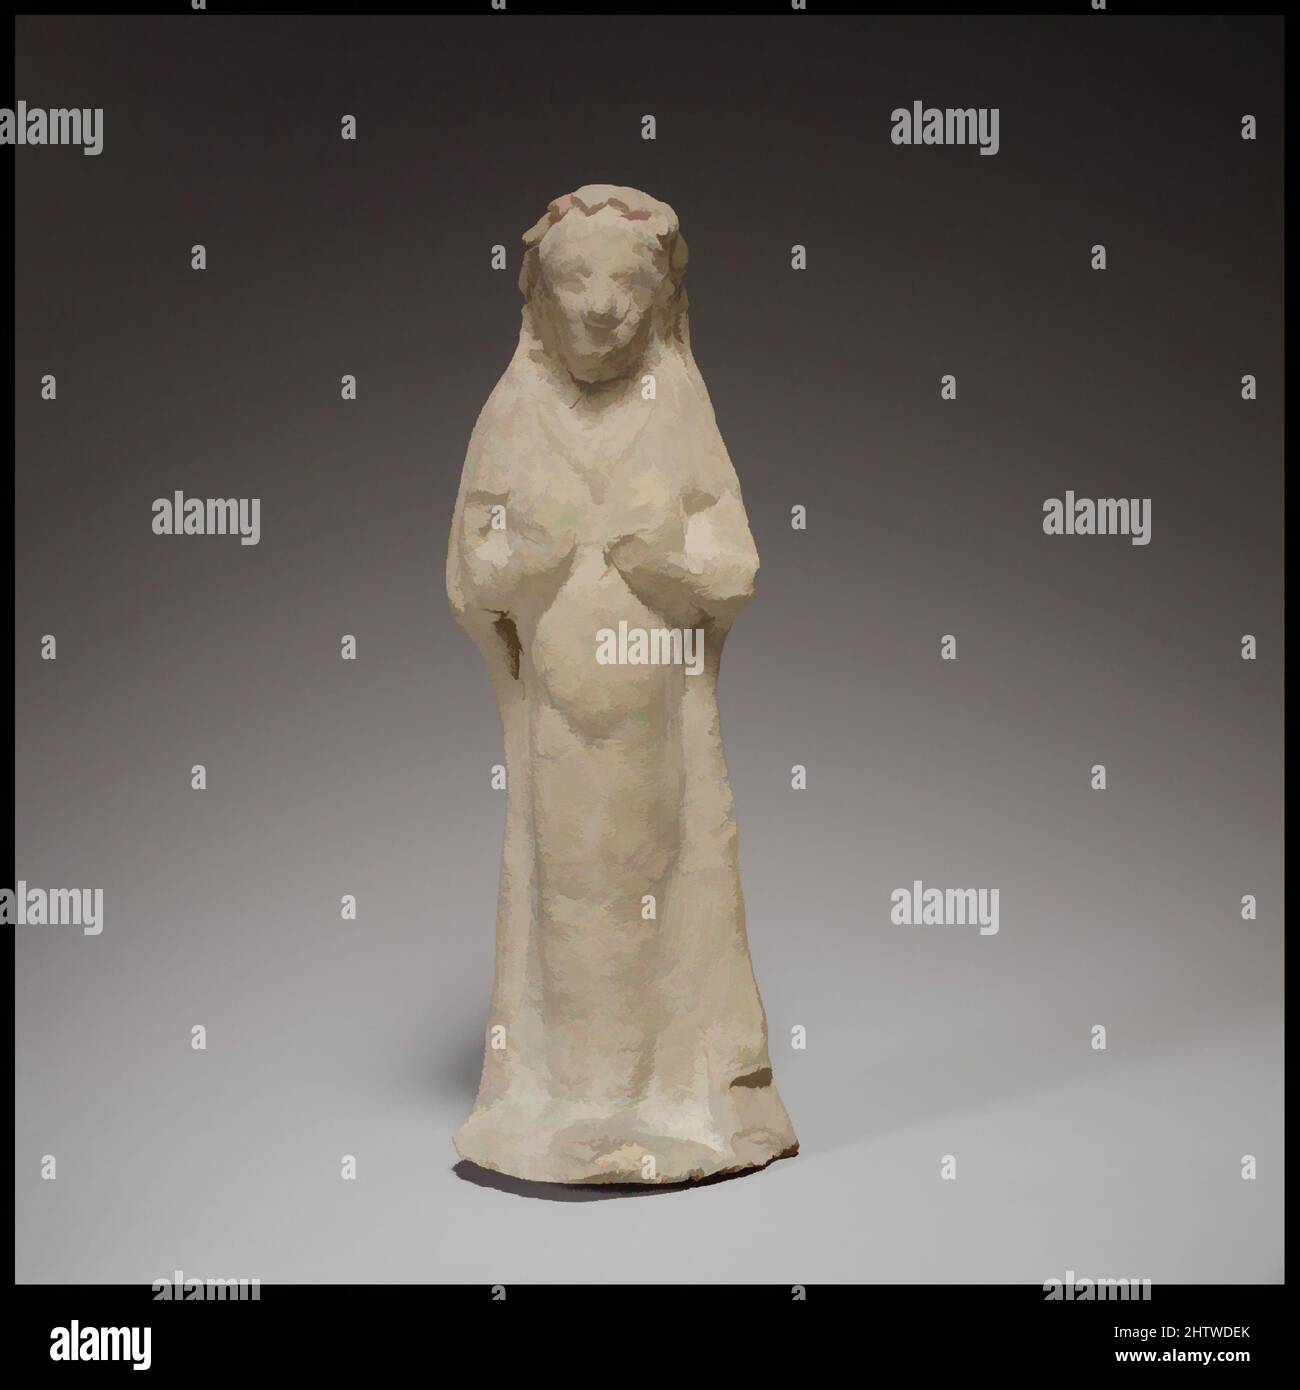 Art inspired by Terracotta statuette of a woman, Cypro-Archaic II, ca. 600–480 B.C., Cypriot, Terracotta; mold-made, H. 5 3/4 in. (14.6 cm), Terracottas, The figure represents a votary, or worshipper. Of particular interest is her jewelry, including ear caps and two necklaces, Classic works modernized by Artotop with a splash of modernity. Shapes, color and value, eye-catching visual impact on art. Emotions through freedom of artworks in a contemporary way. A timeless message pursuing a wildly creative new direction. Artists turning to the digital medium and creating the Artotop NFT Stock Photo